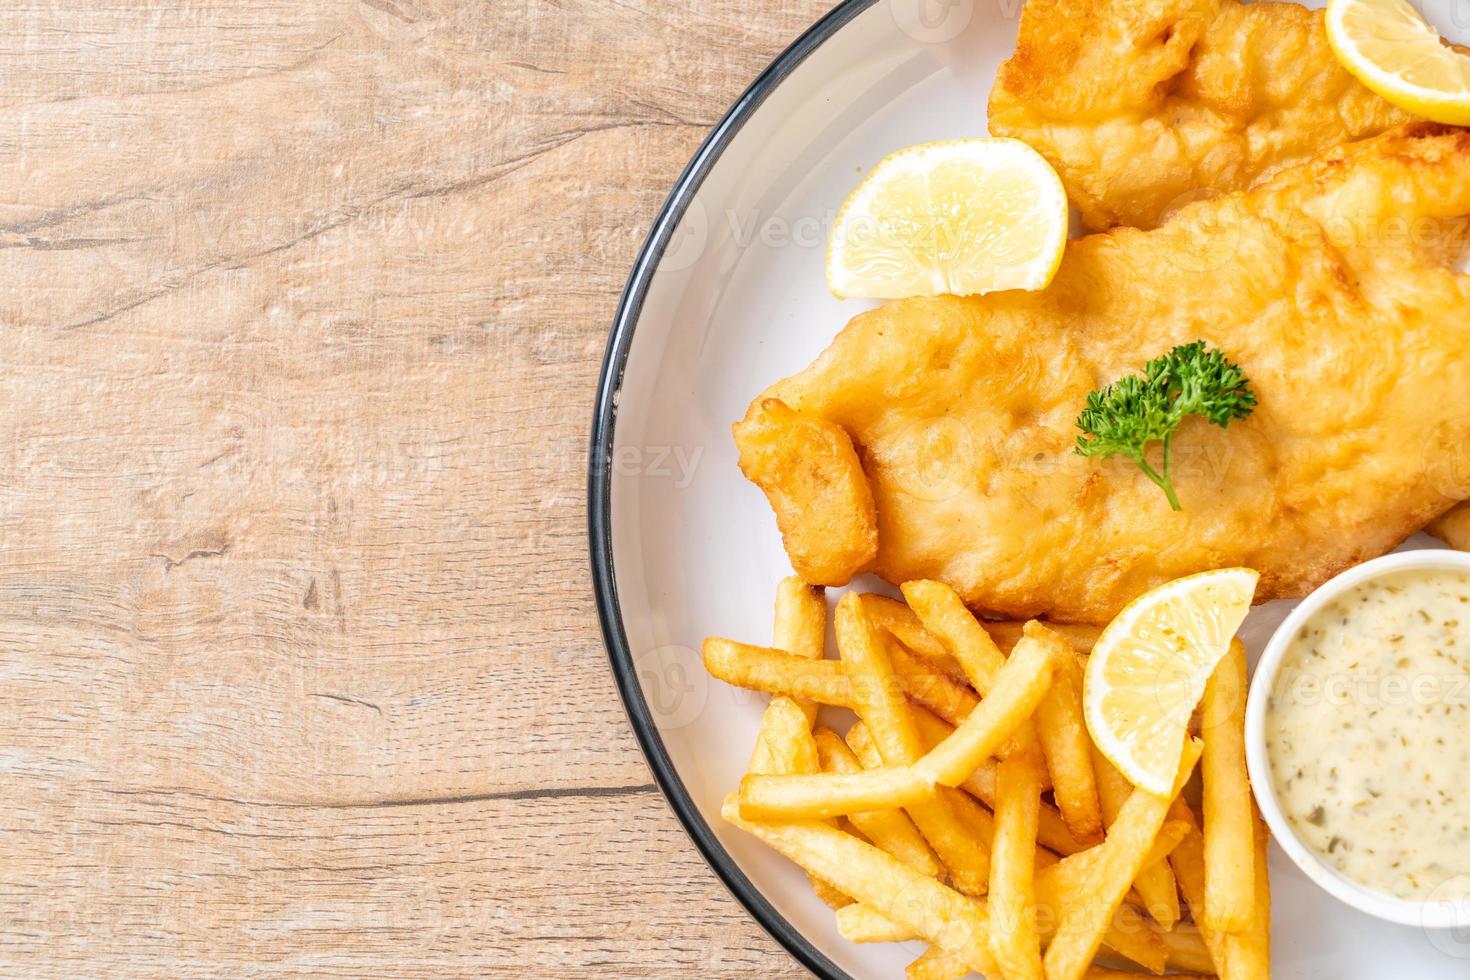 fish and chips avec frites - nourriture malsaine photo